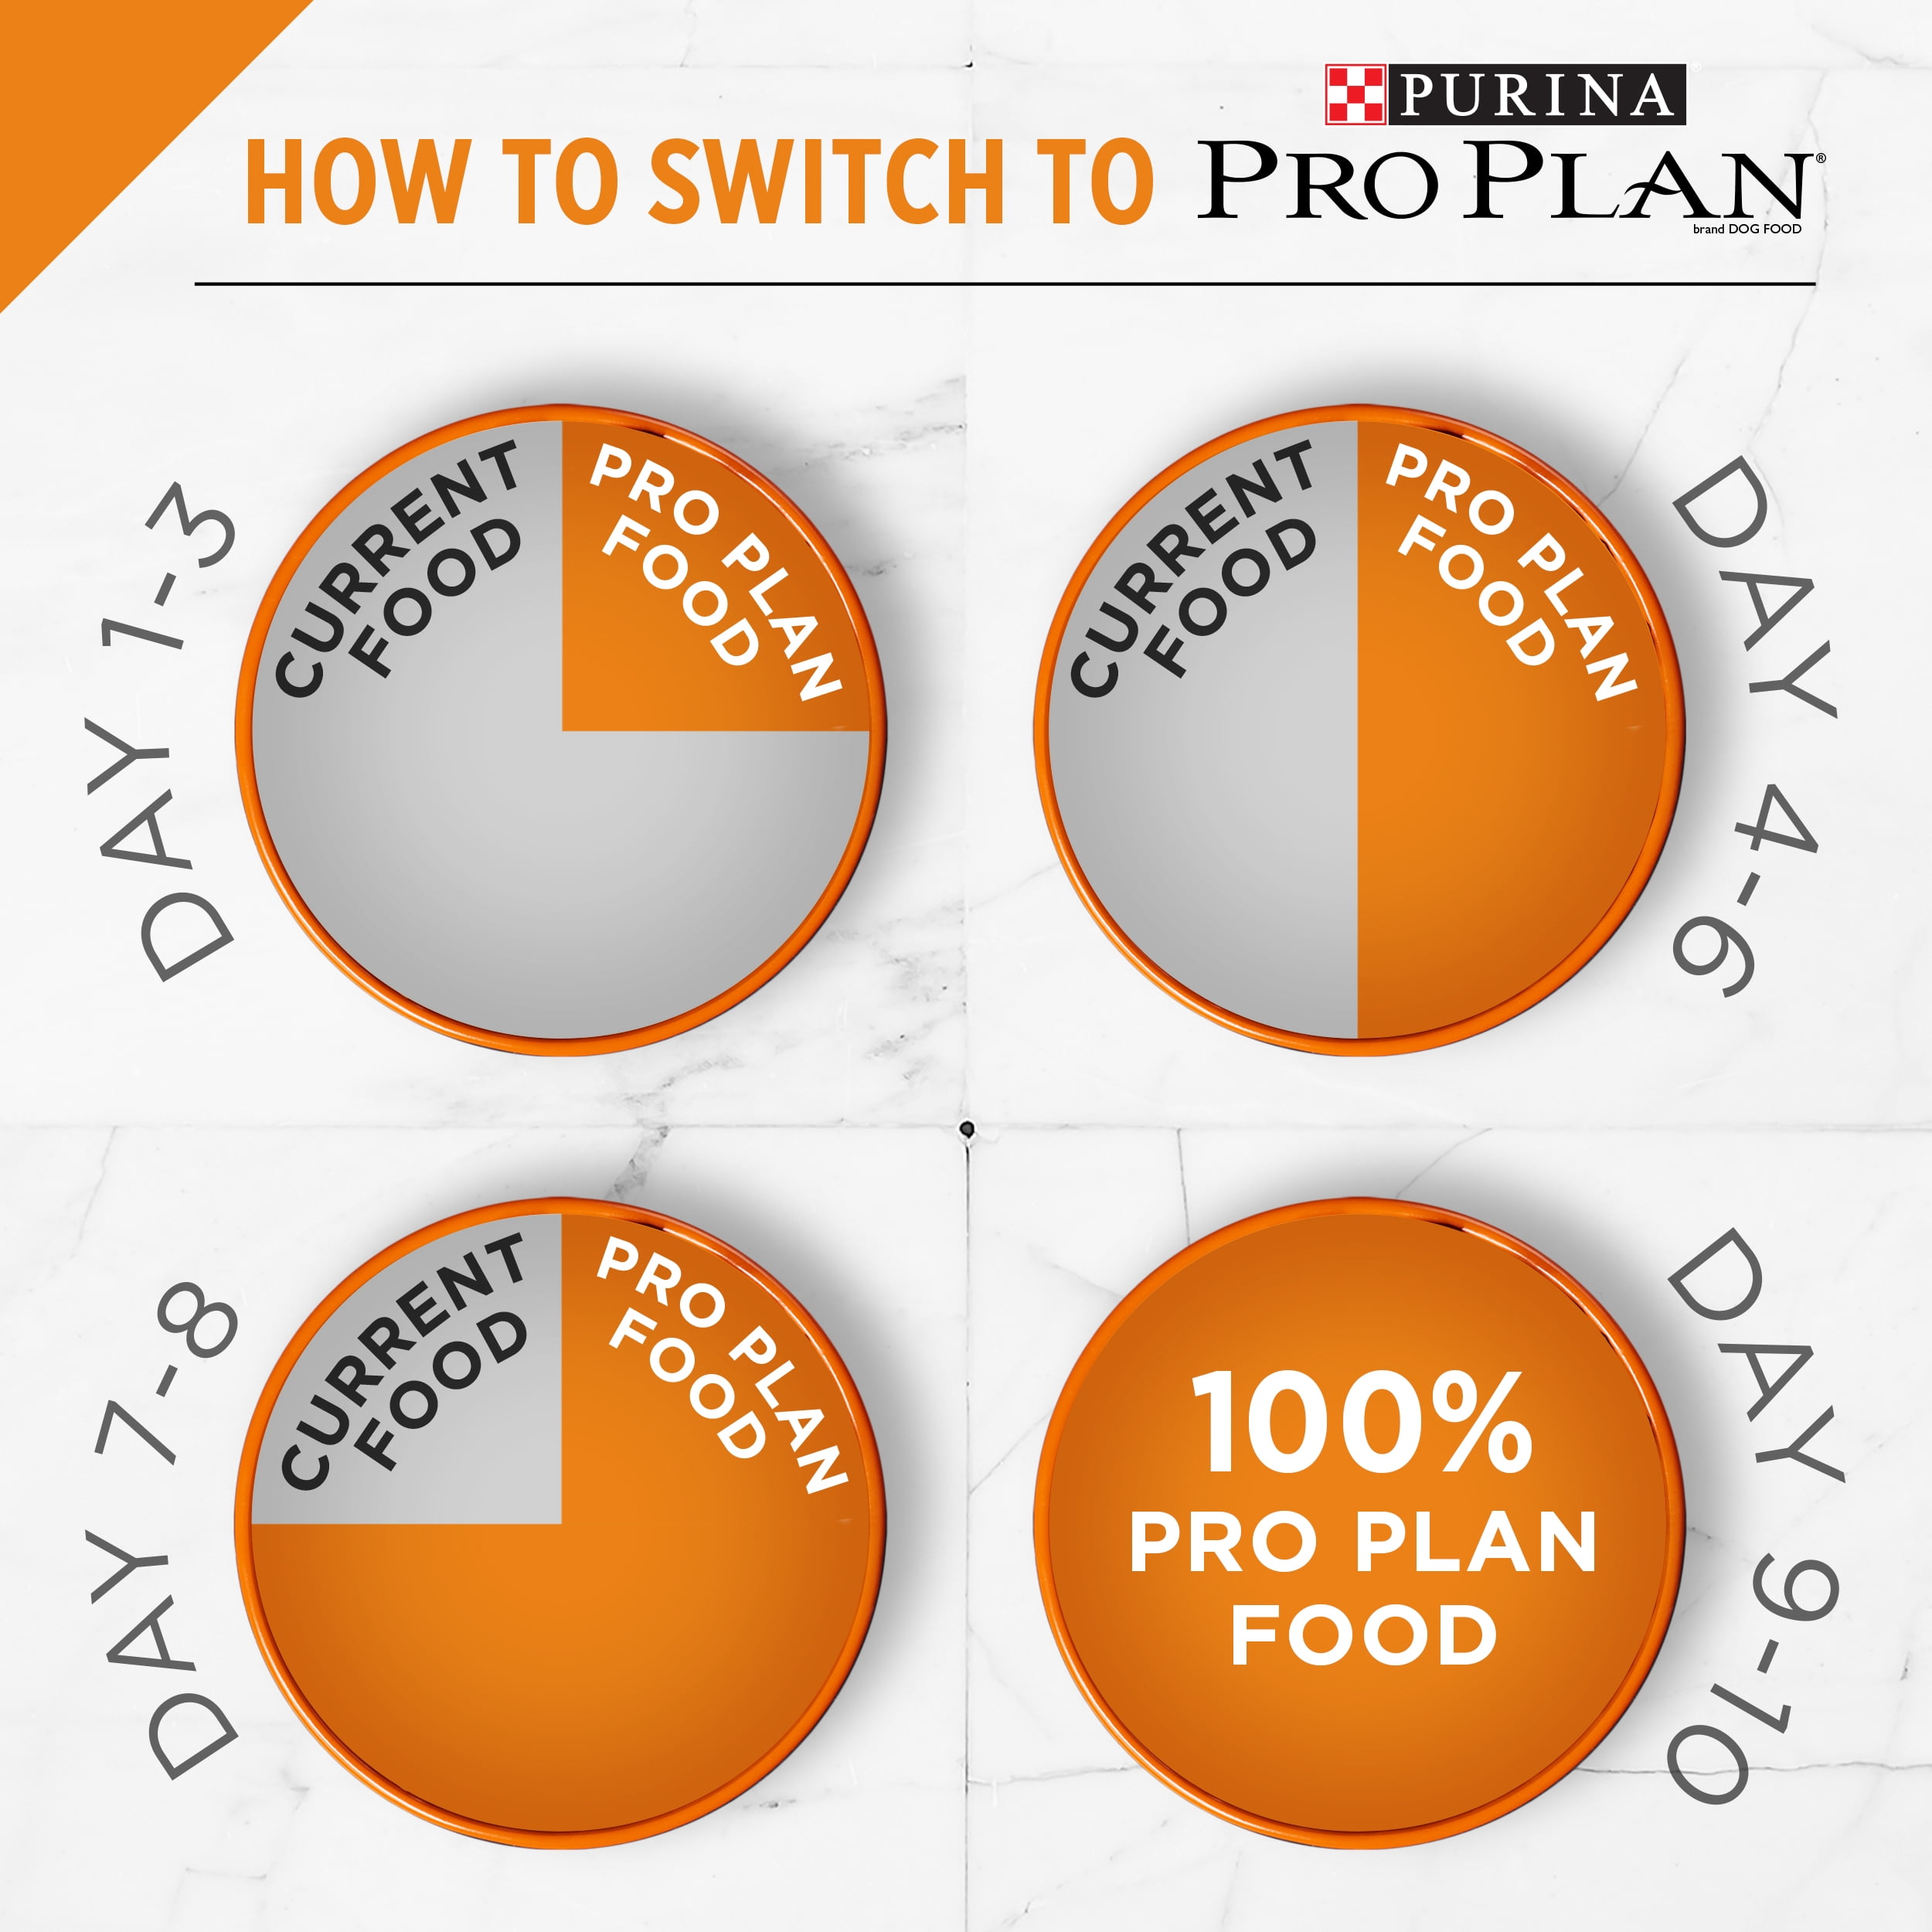 pro plan savor beef and rice